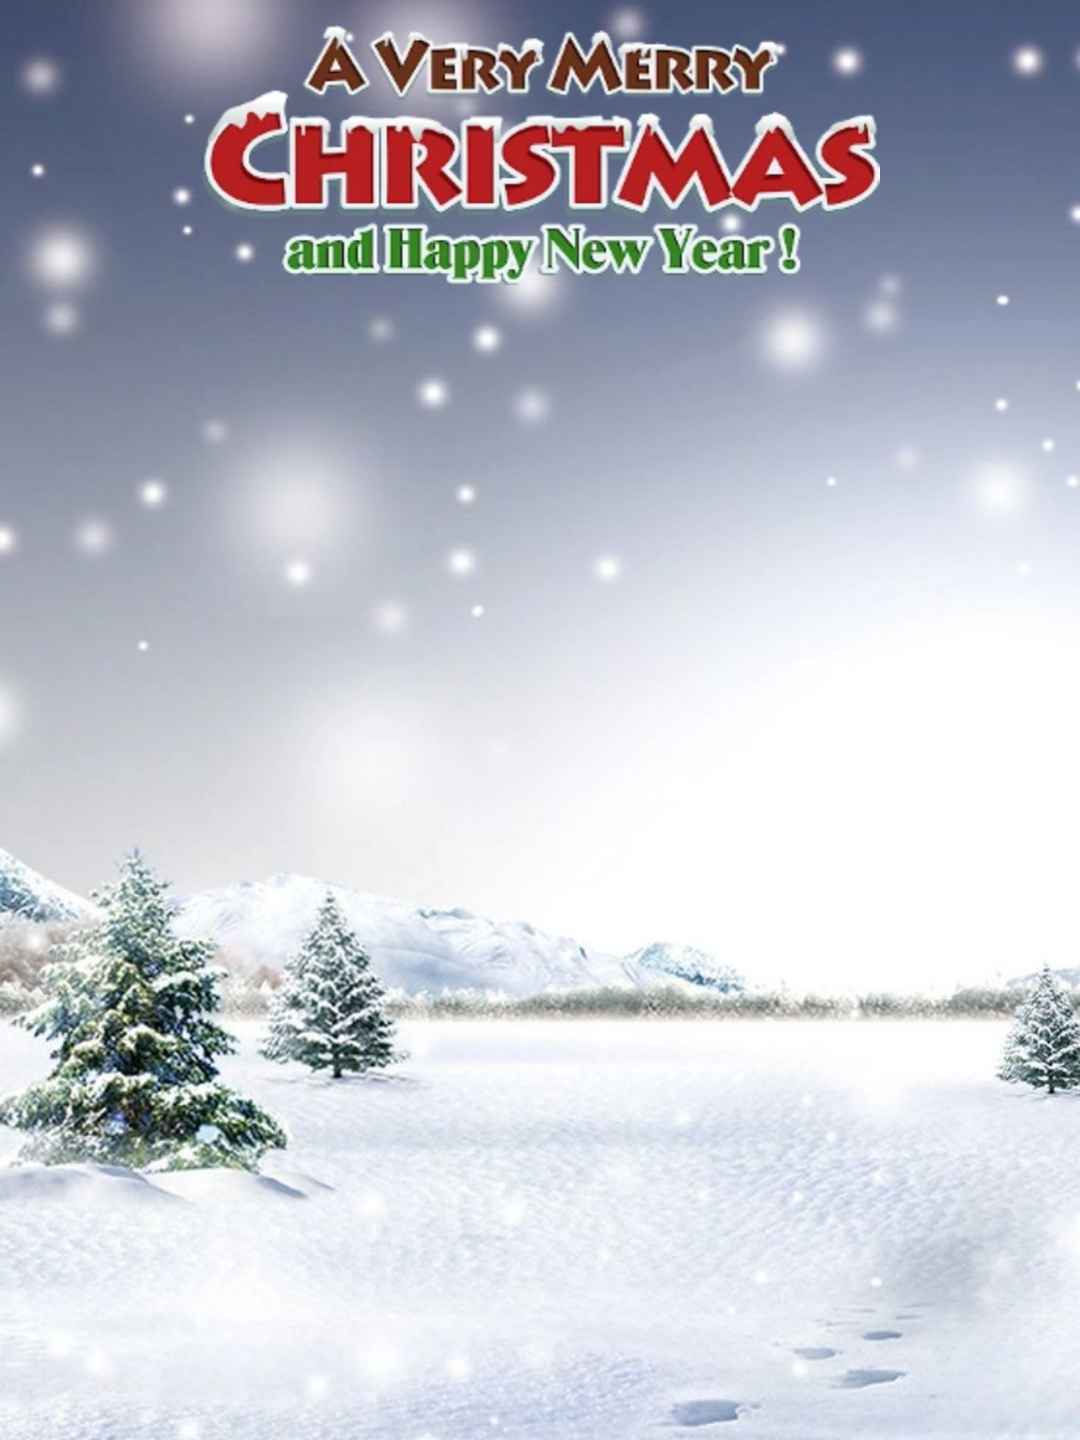 Merry Christmas Tree CB Snapseed Background Download